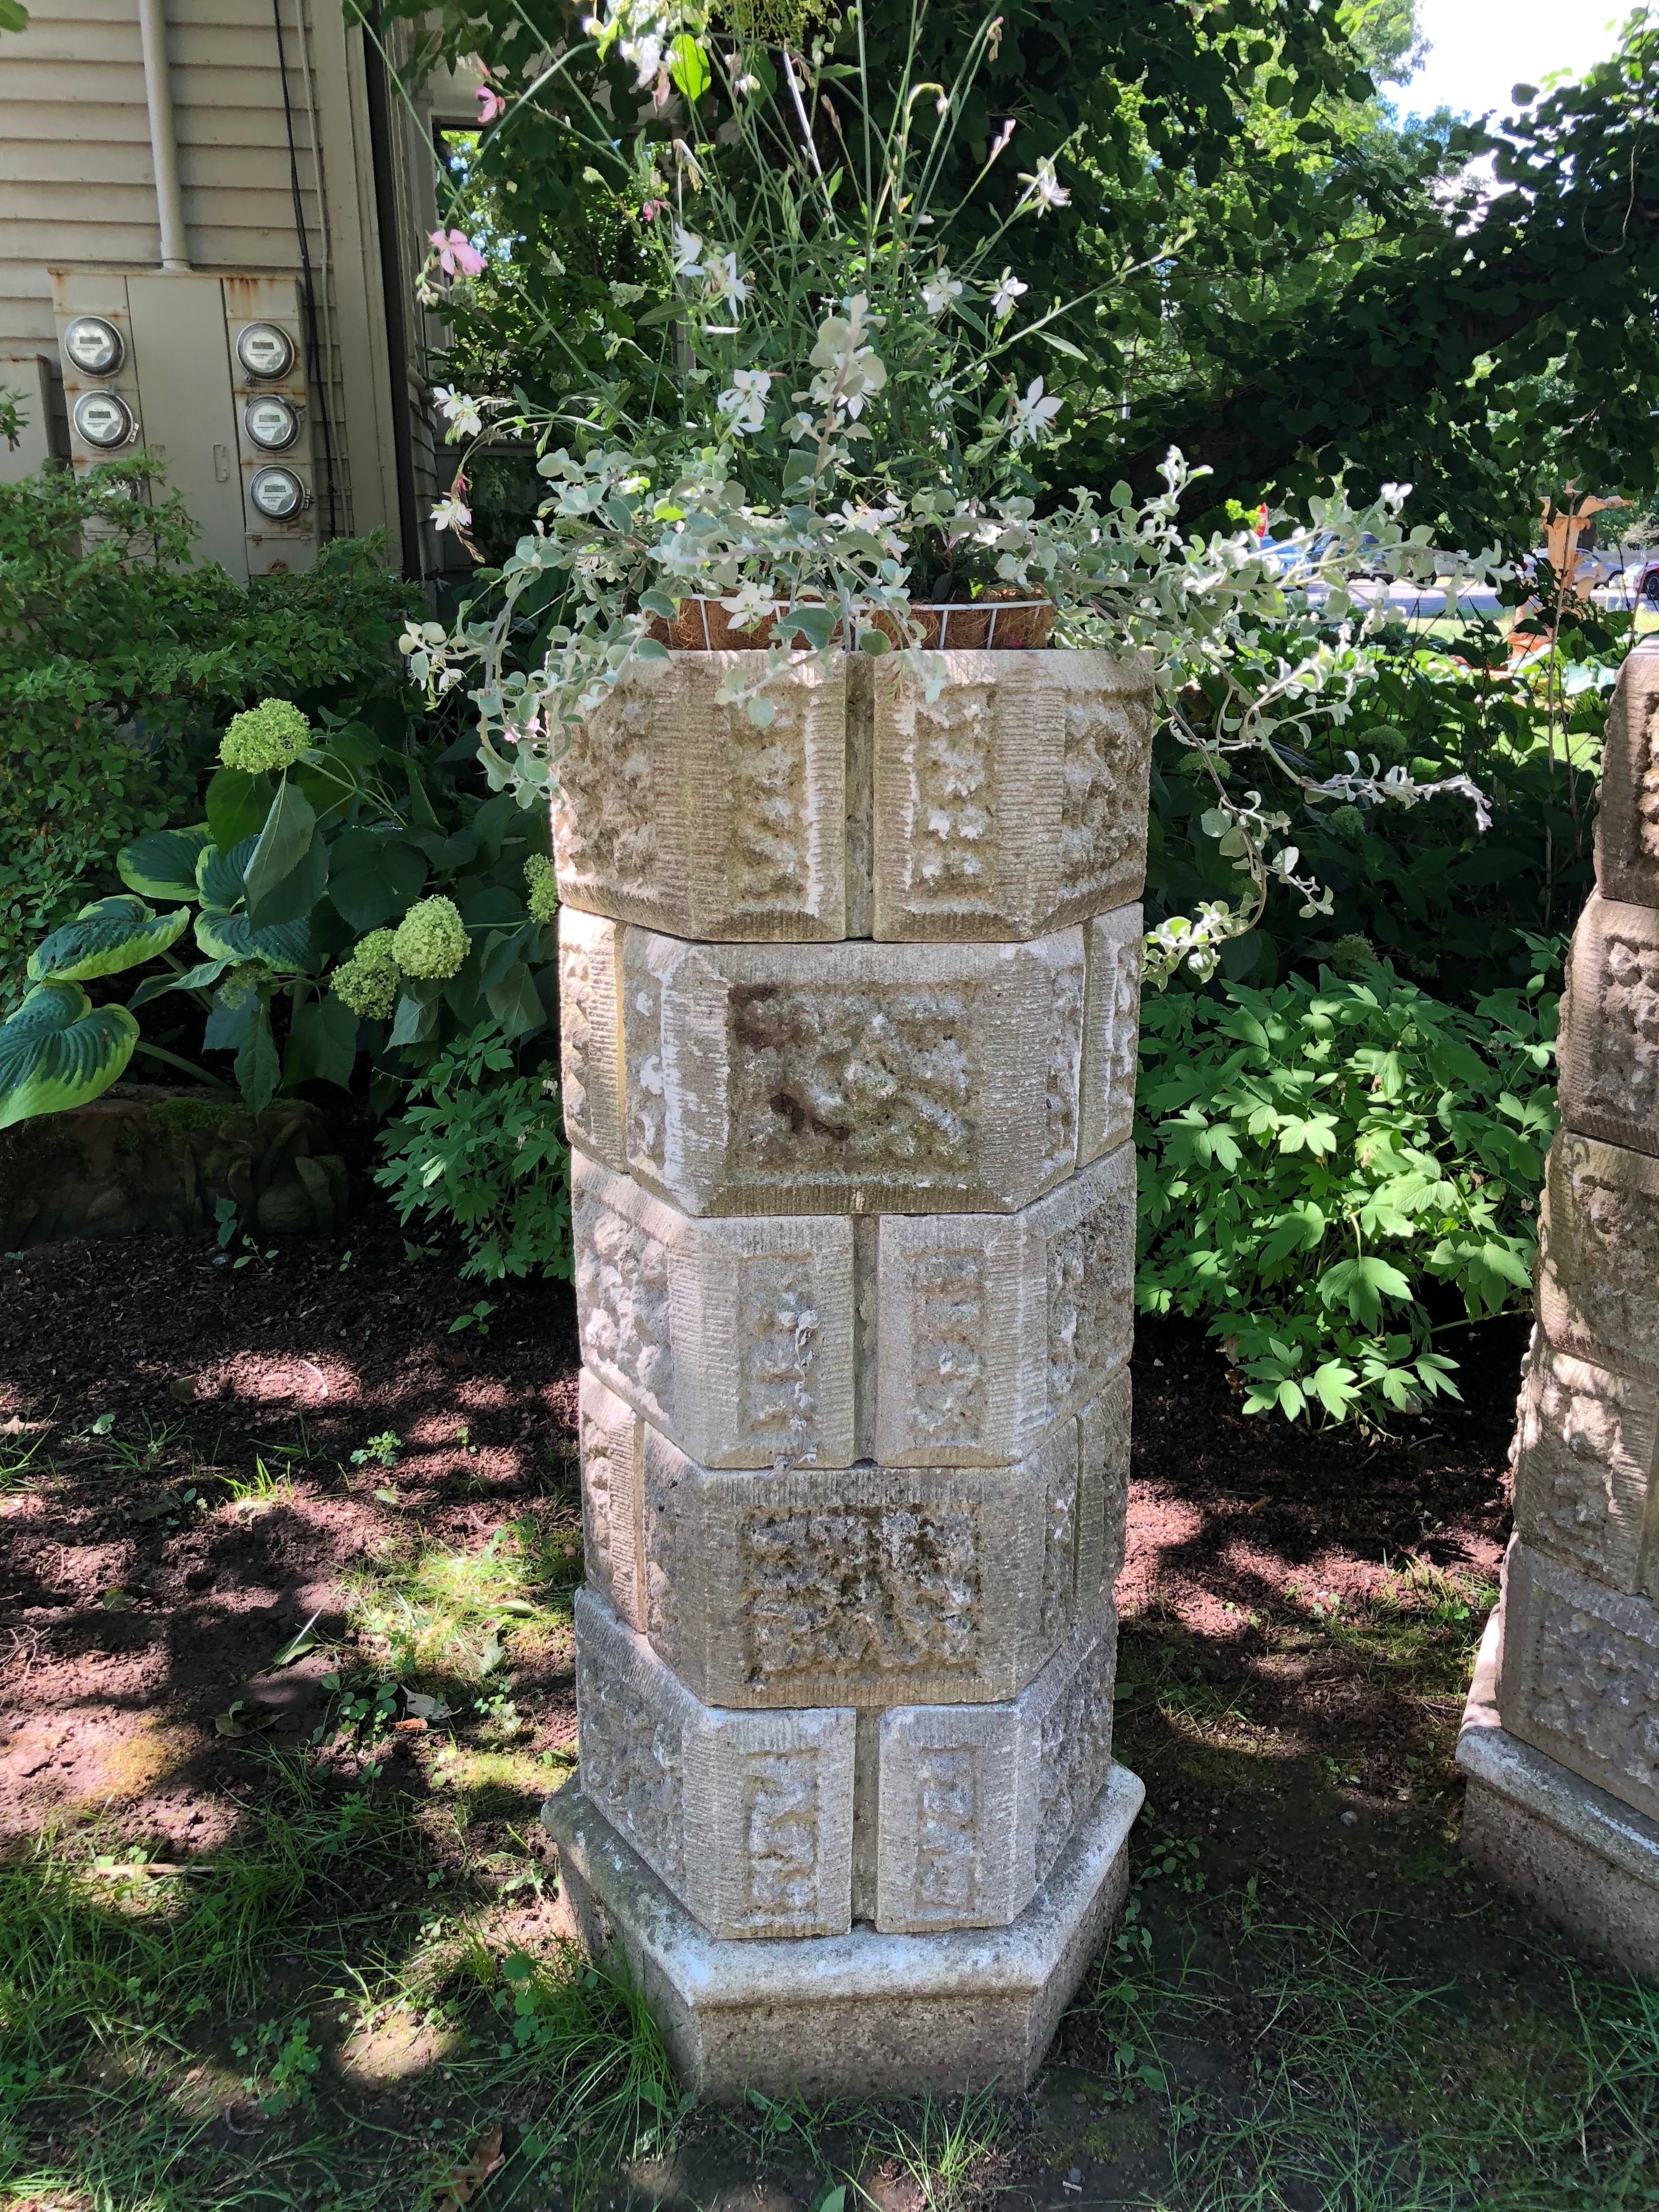 This pair of stackable cast stone planters has six tiers so you can use all six or remove one or two to achieve your desired height. Unusual in form and style, they would be the perfect accompaniment to a Tudor or Gothic Revival home or garden.